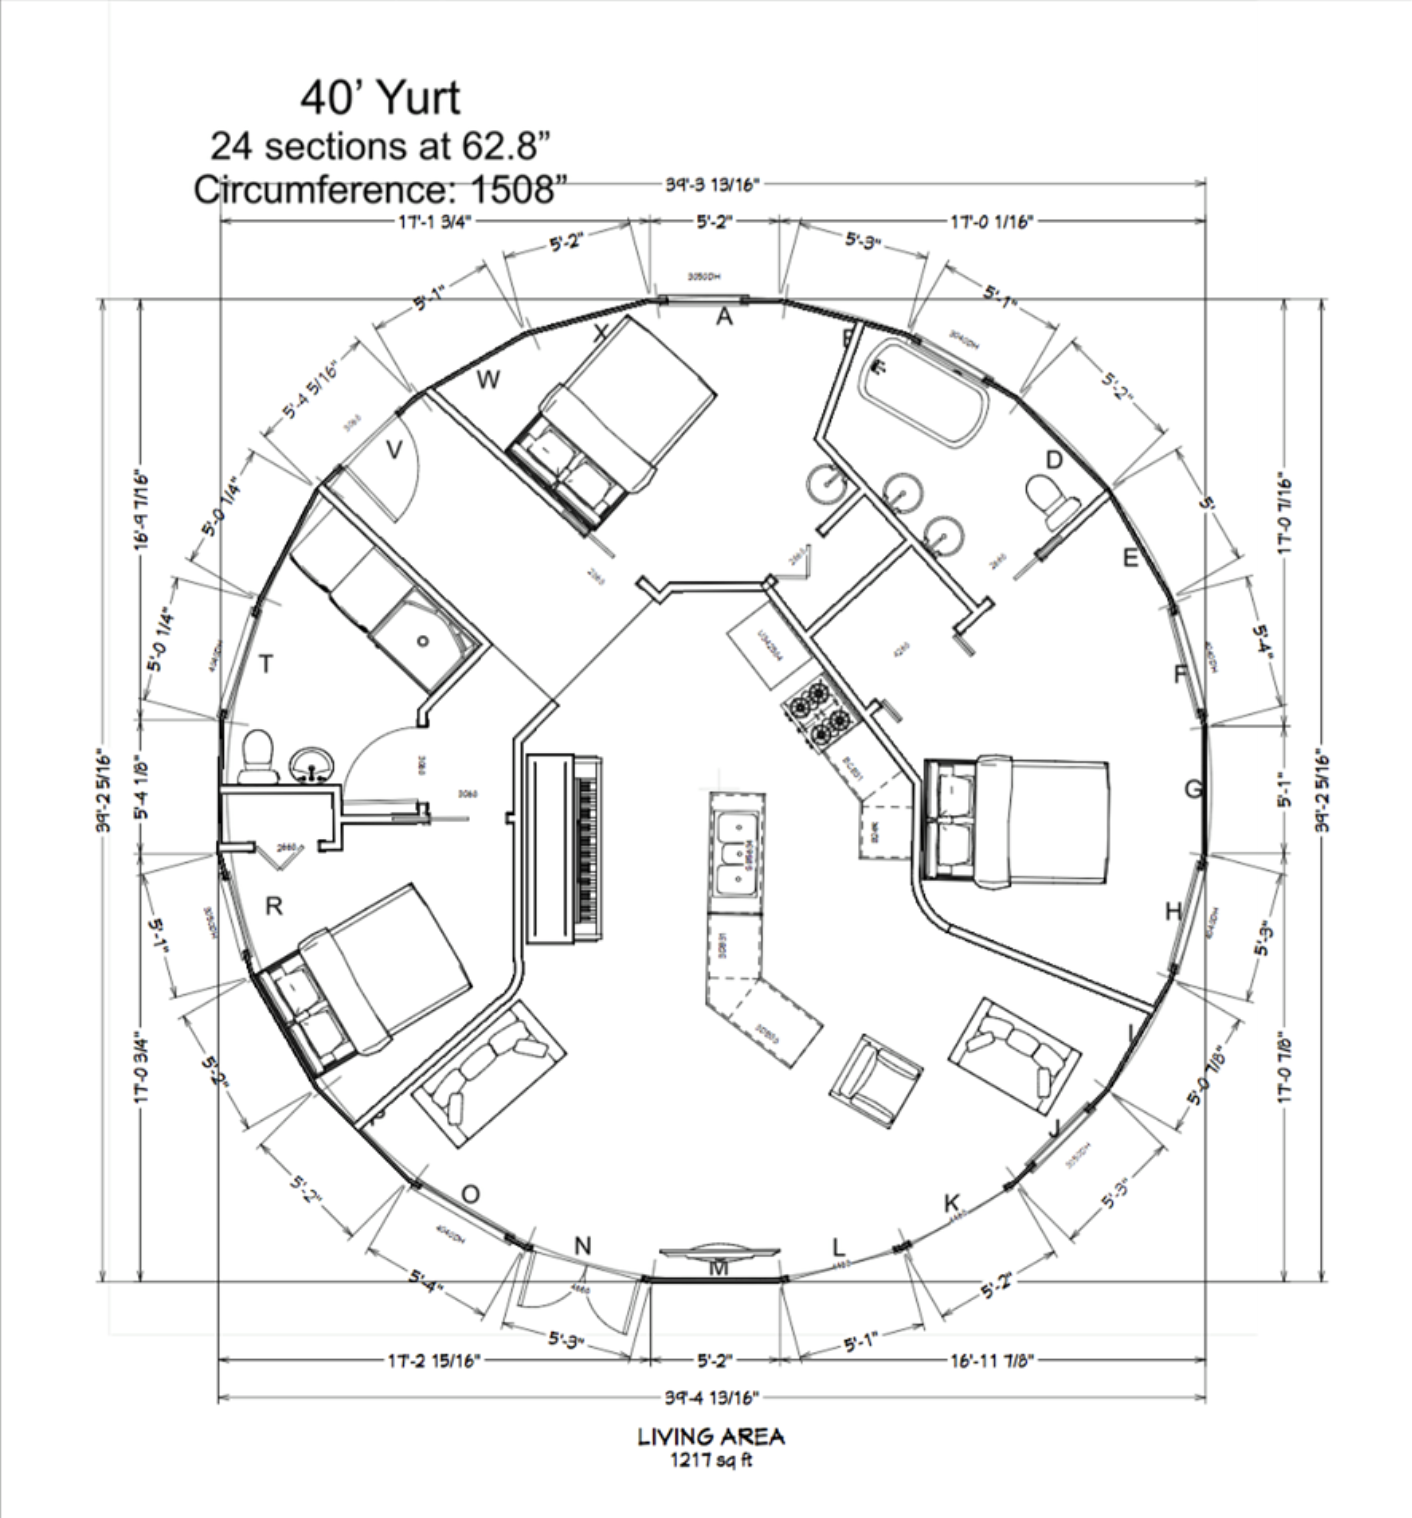 Yurt Floor Plans Laying Out Your Yurt Shelter Designs